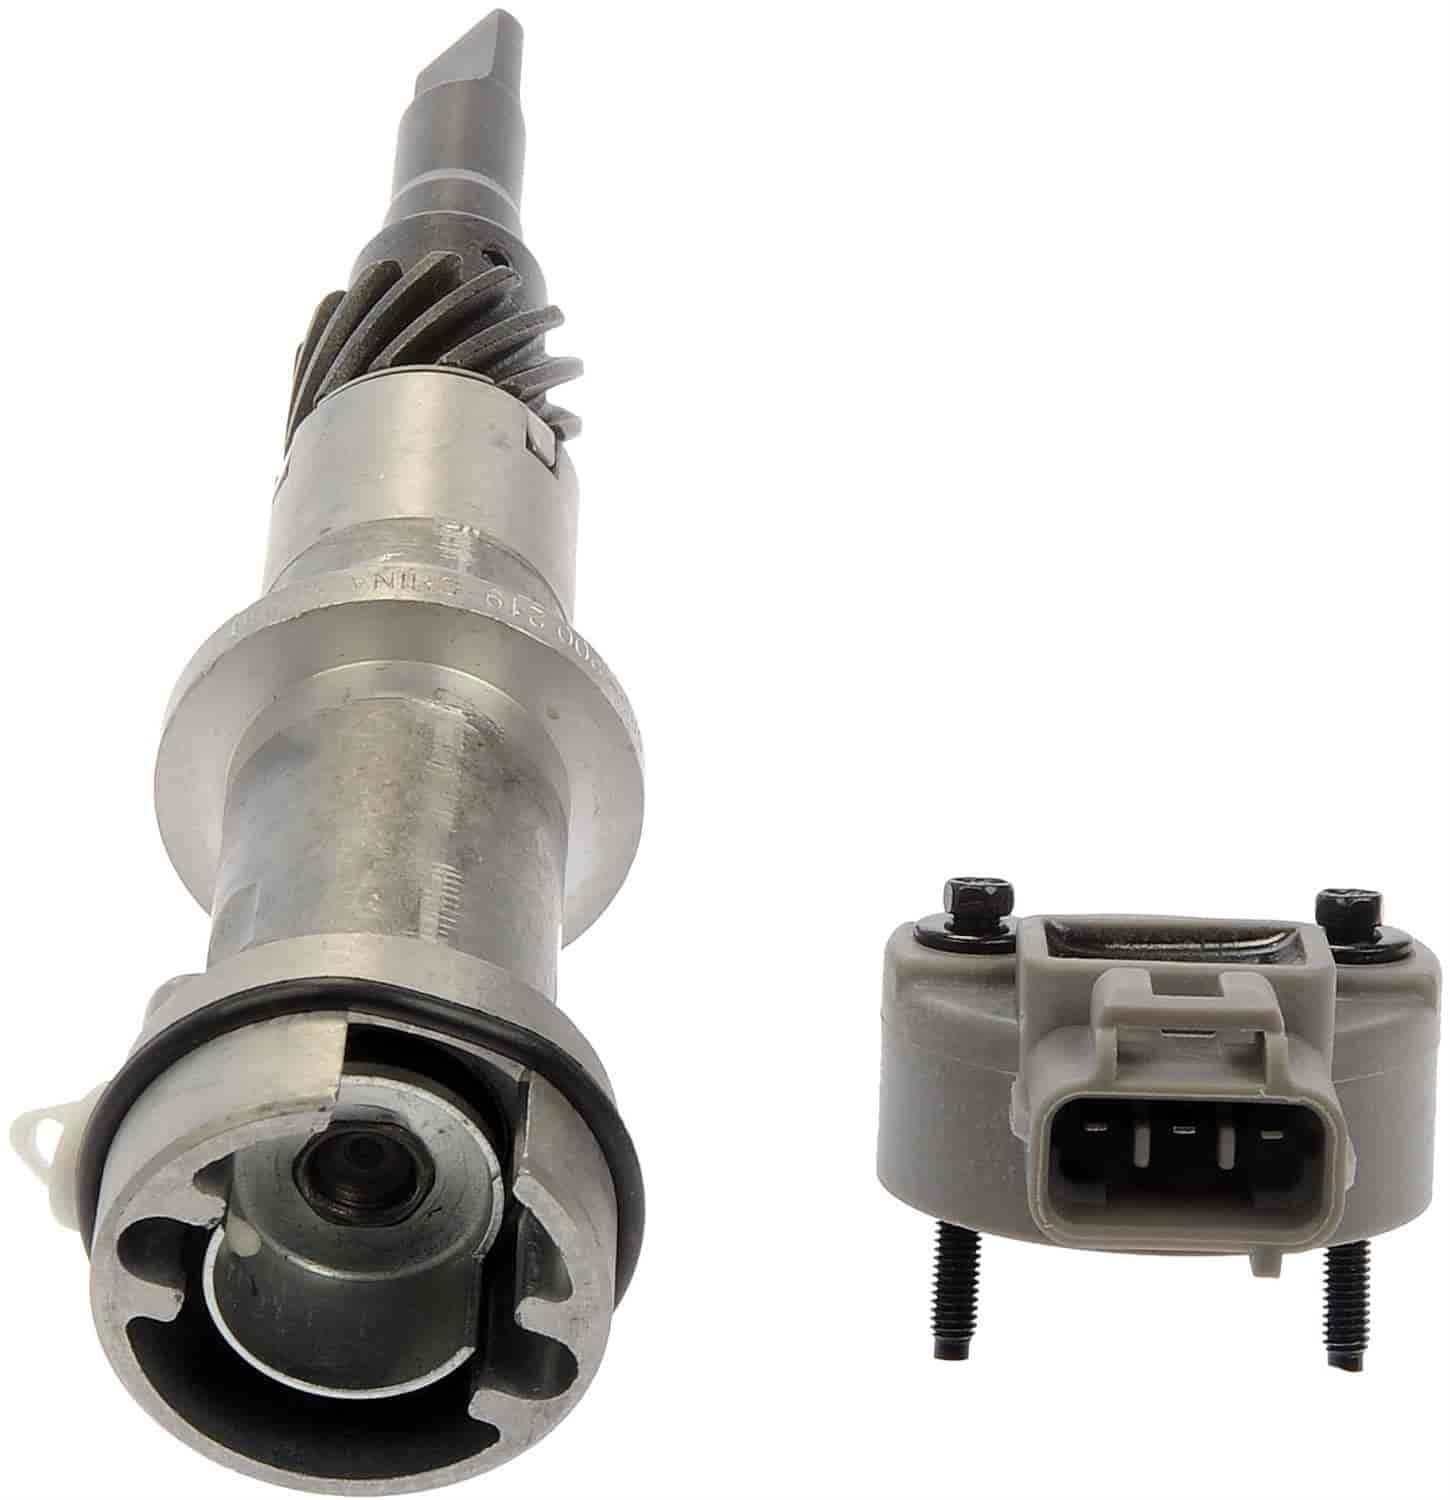 Camshaft Synchronizer for 2000-2001 Jeep Cherokee, 1999-2004 Jeep